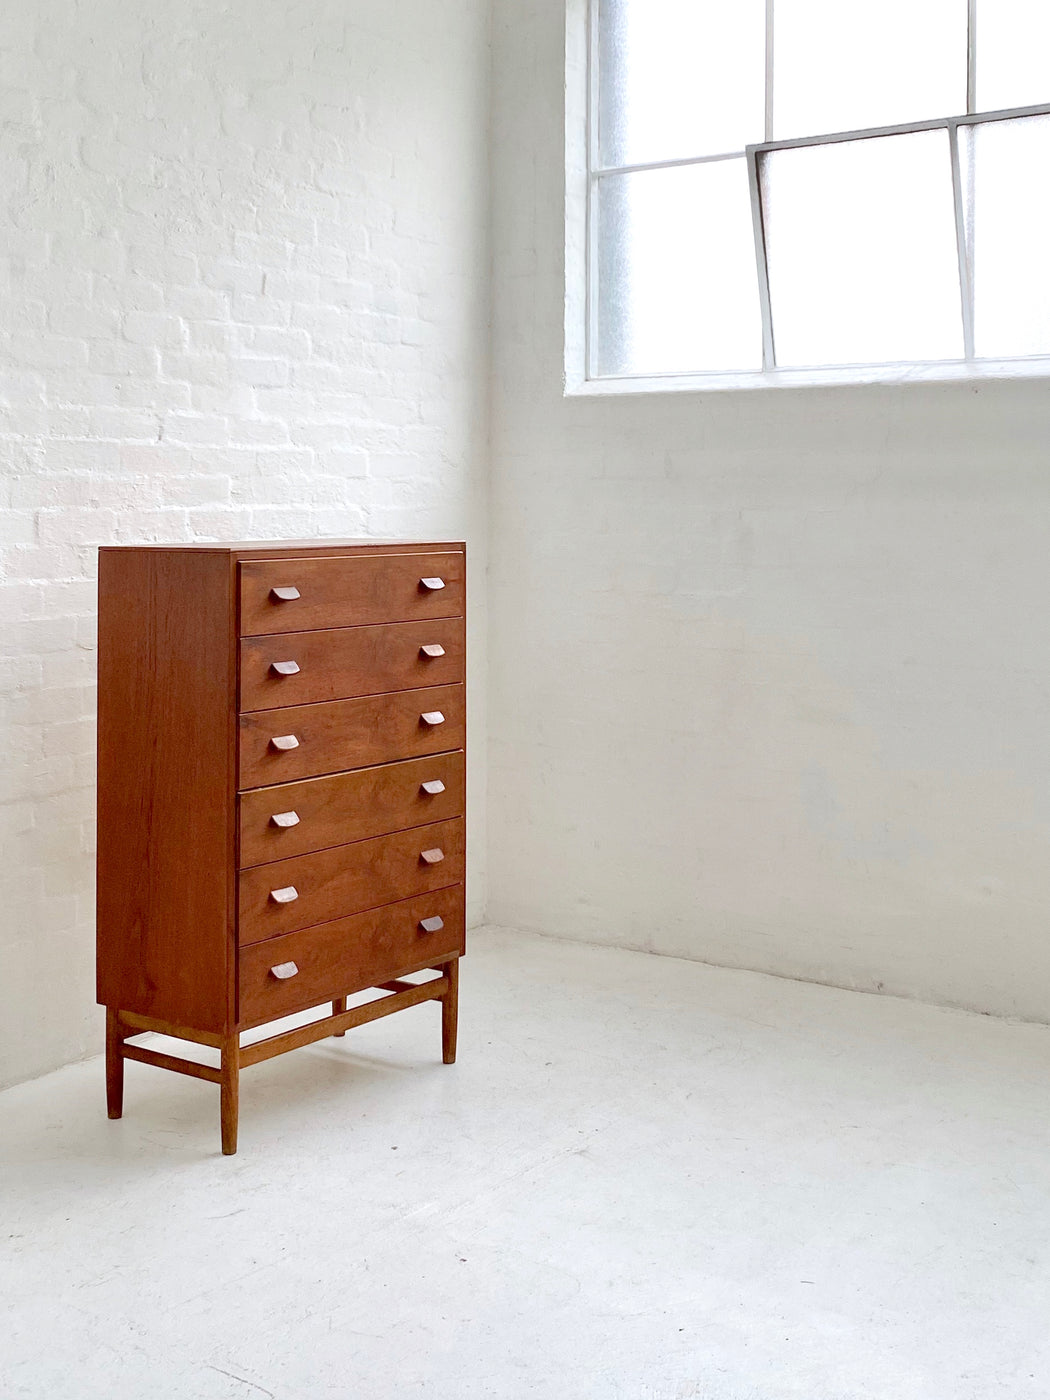 Poul Volther 'Model F17' Tallboy Drawers